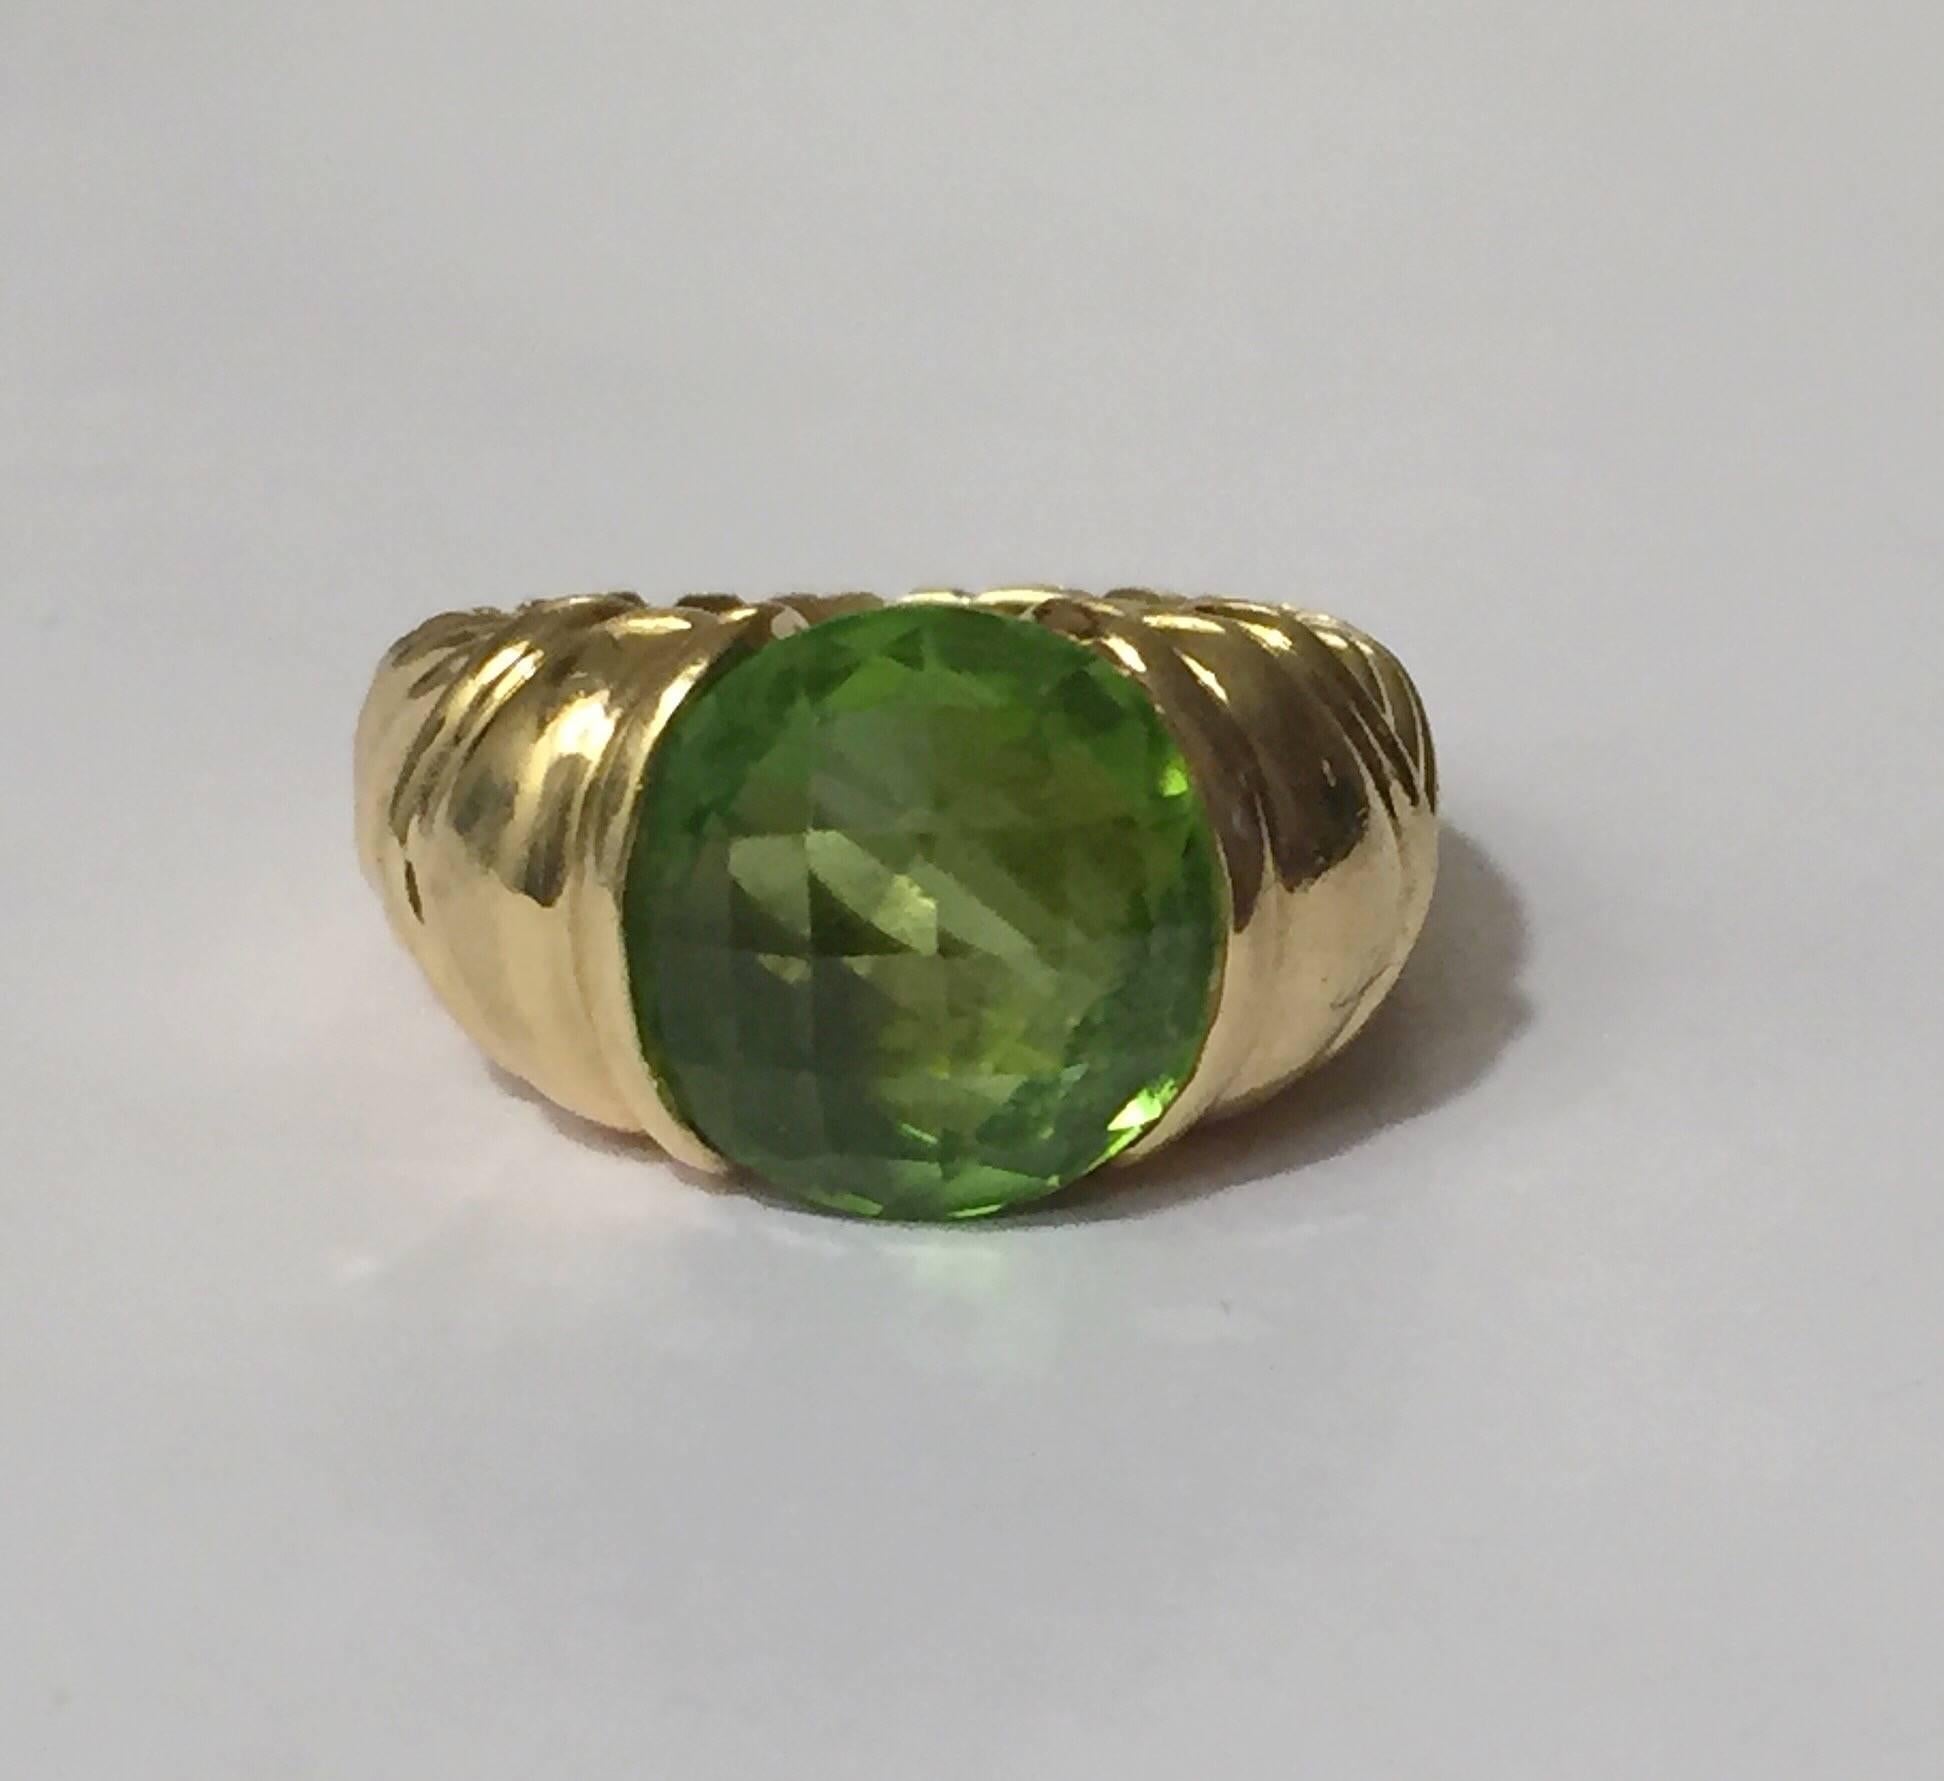 David Yurman 18kt Yellow Gold and faceted cushion cut Peridot Ring with signature cable designs.  The ring can be sized but is in original condition.